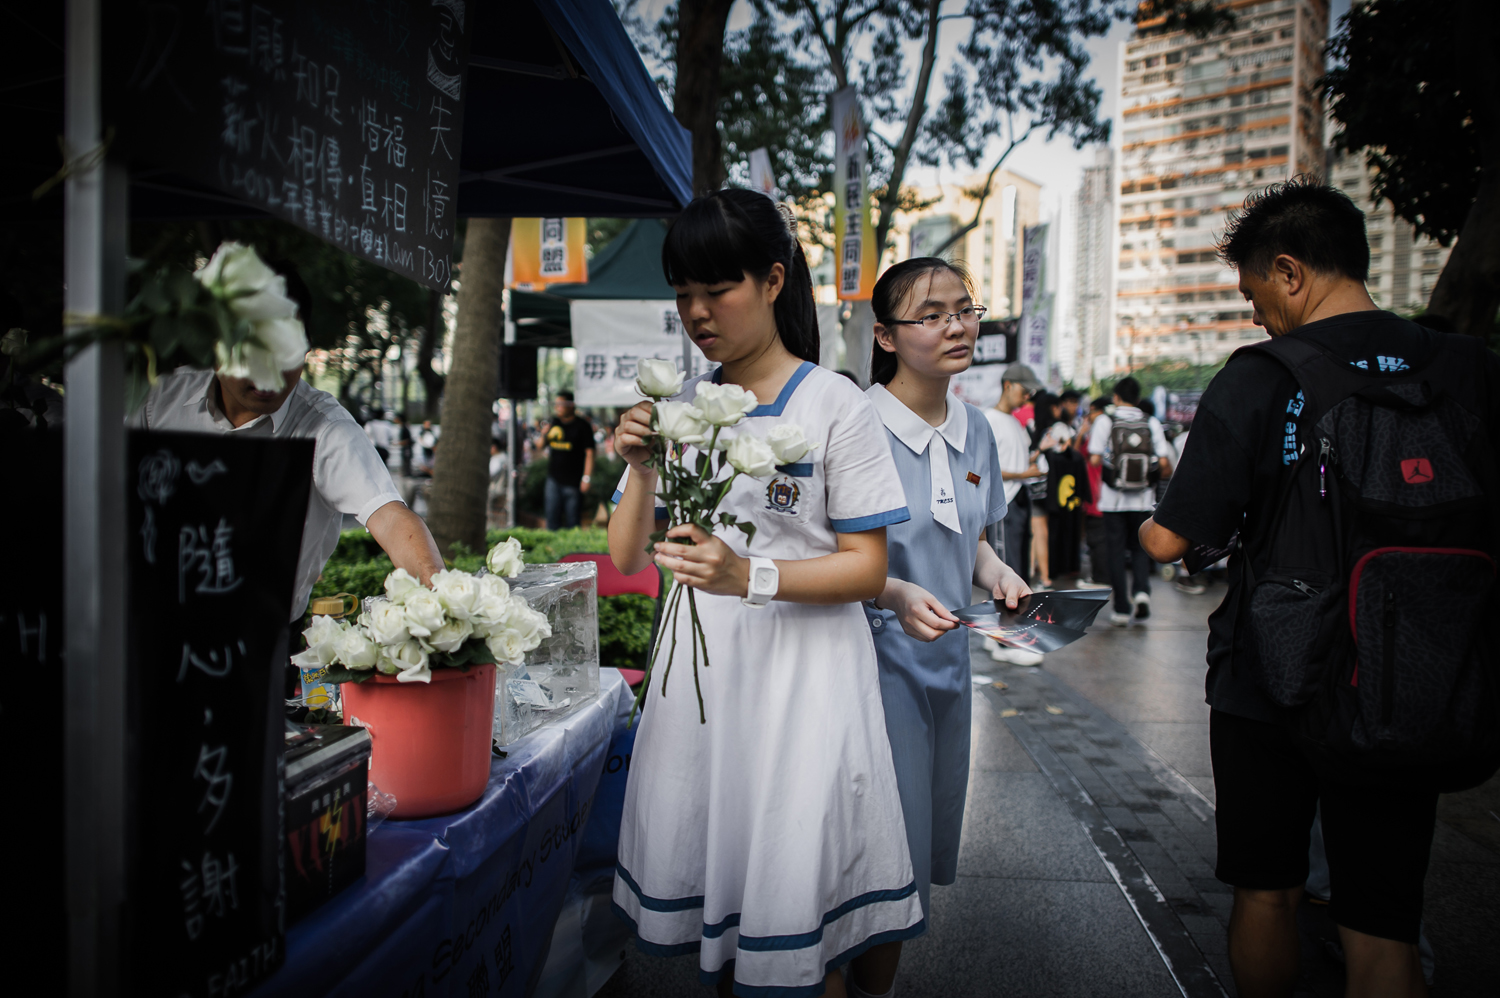 June 4, 2012. A schoolgirl offers roses while another distributes leaflets in Hong Kong ahead of a candlelight vigil held in the city to mark the anniversary of the crackdown on the pro-democracy movement in Beijing's Tiananmen Square in 1989.